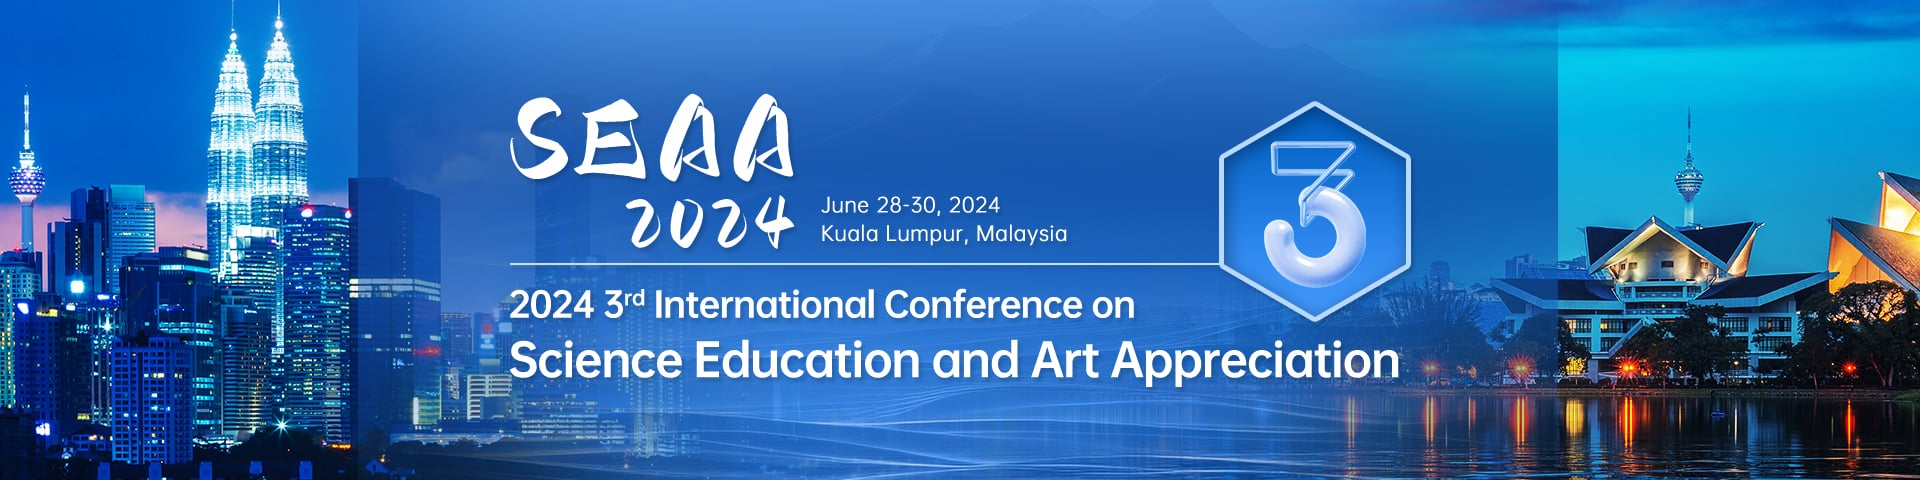 2024 3rd International Conference on Science Education and Art Appreciation (SEAA 2024)